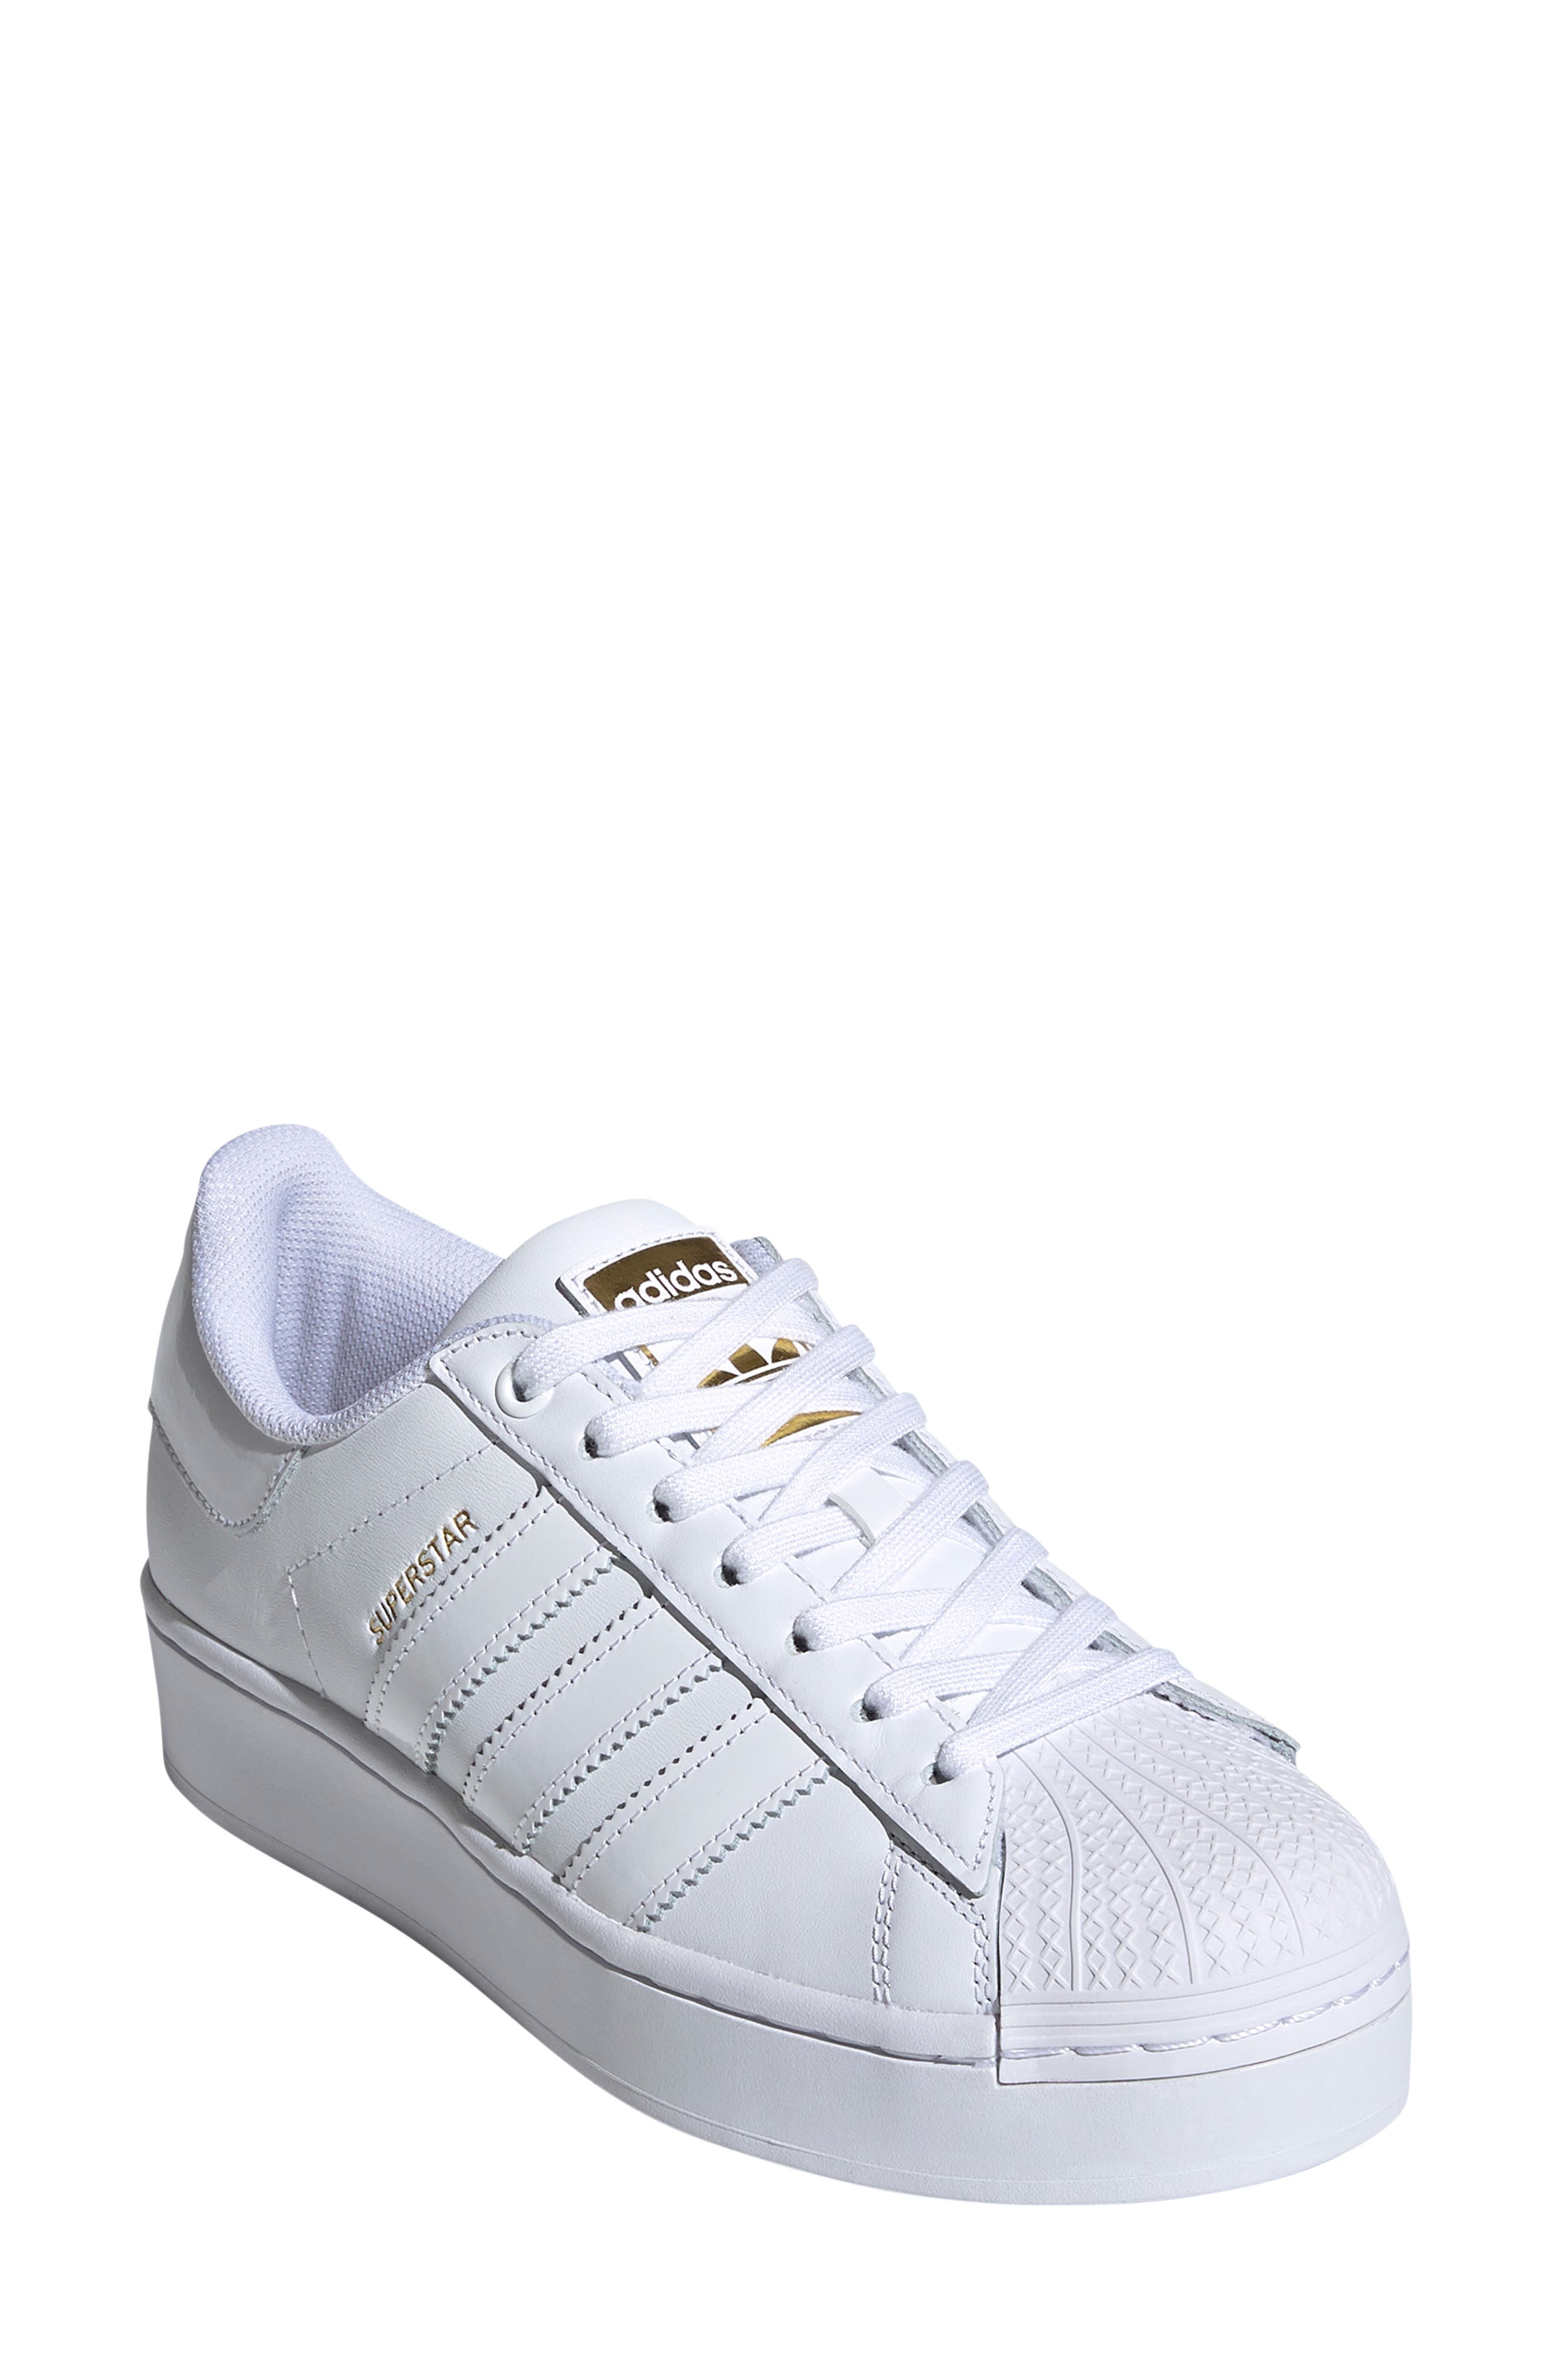 adidas white shoes with gold